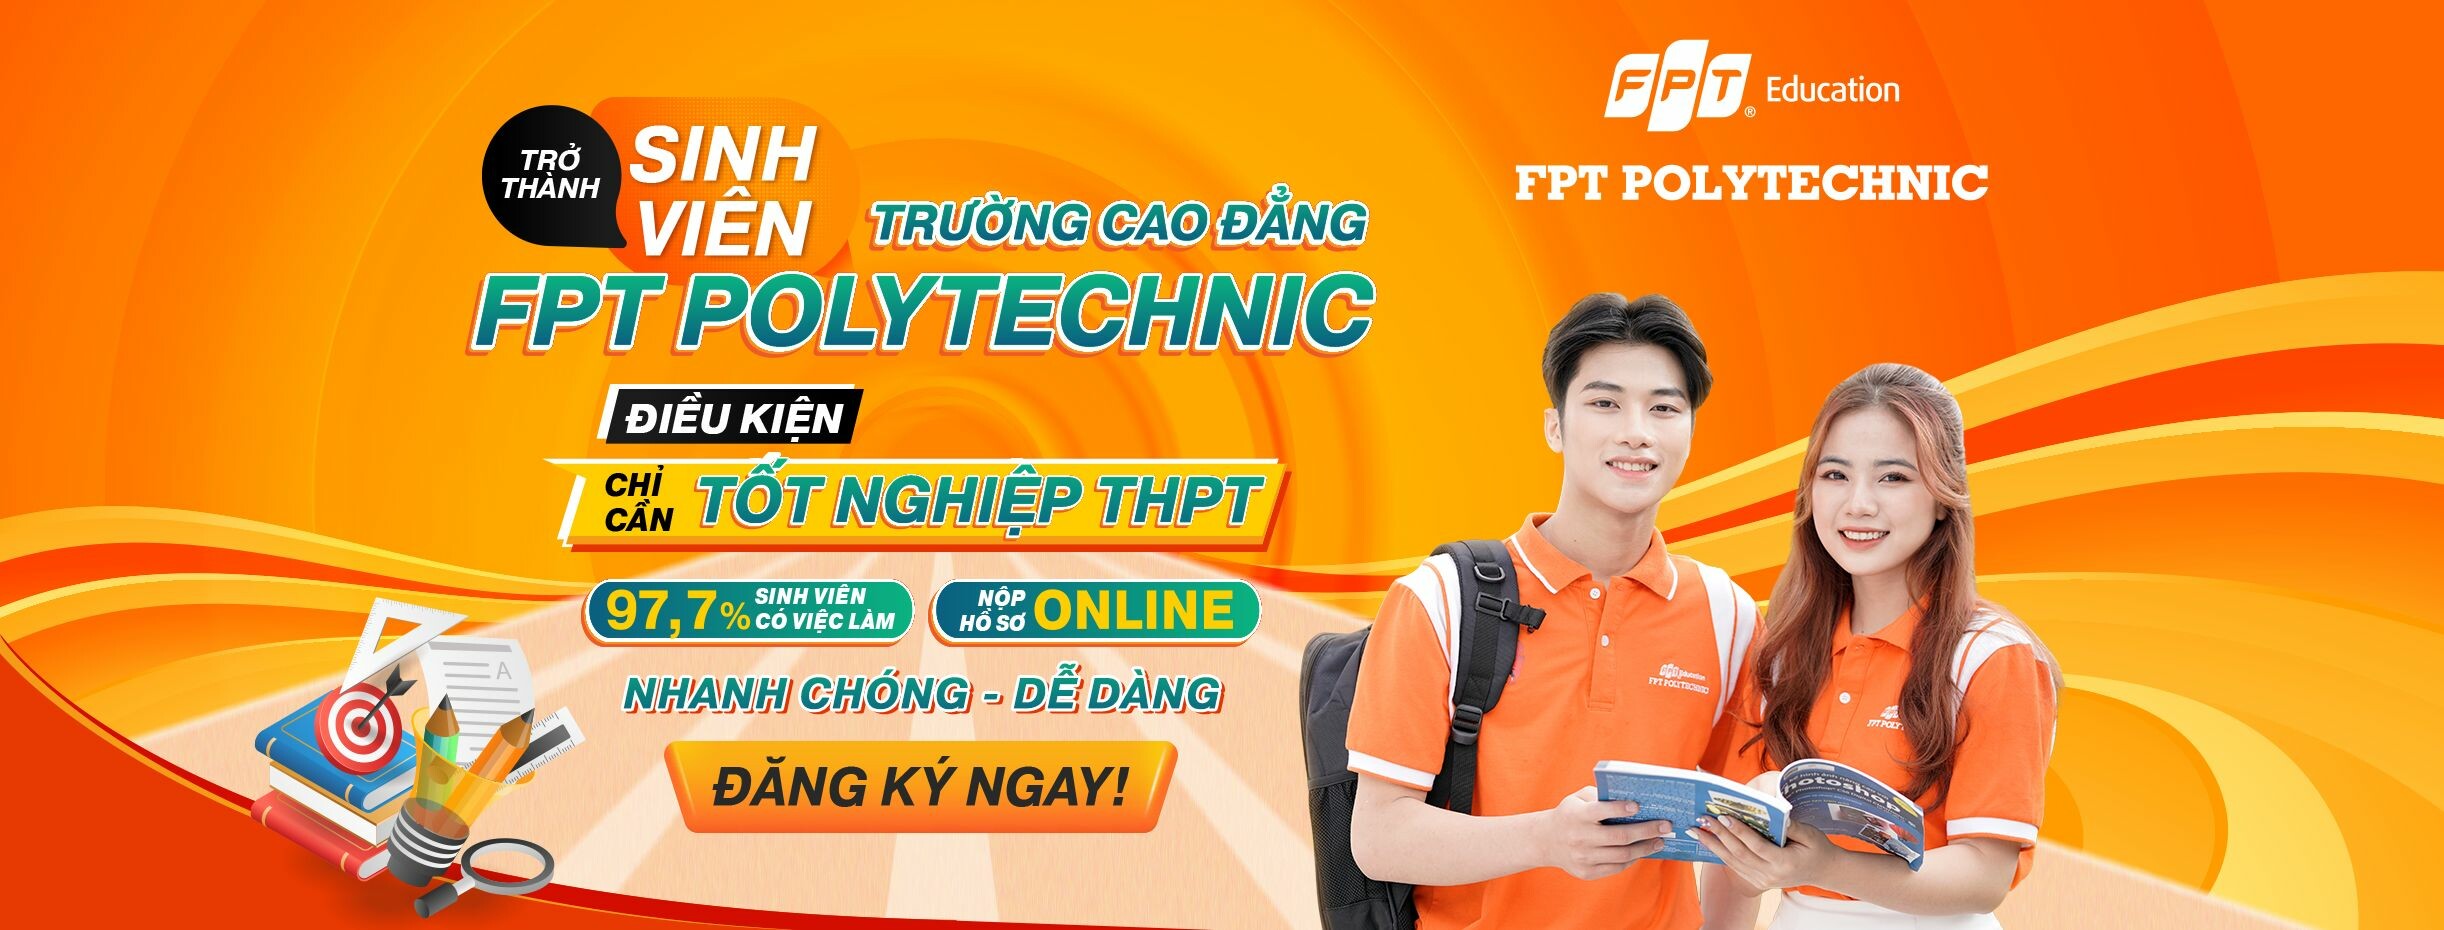 Cover image for Cao đẳng FPT Polytechnic